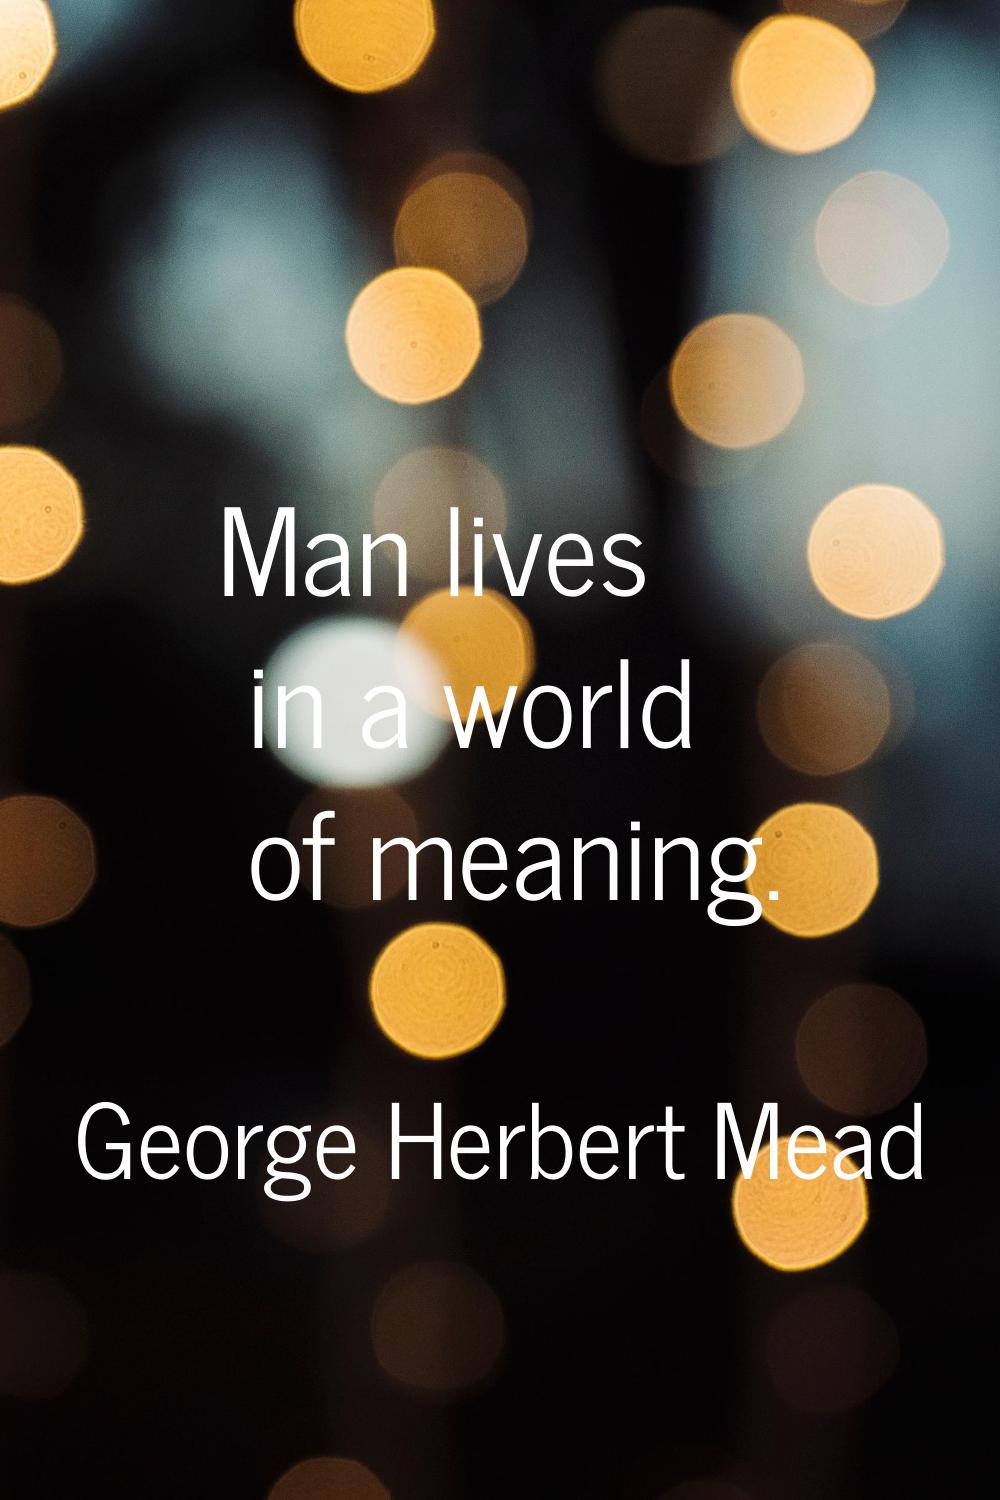 Man lives in a world of meaning.